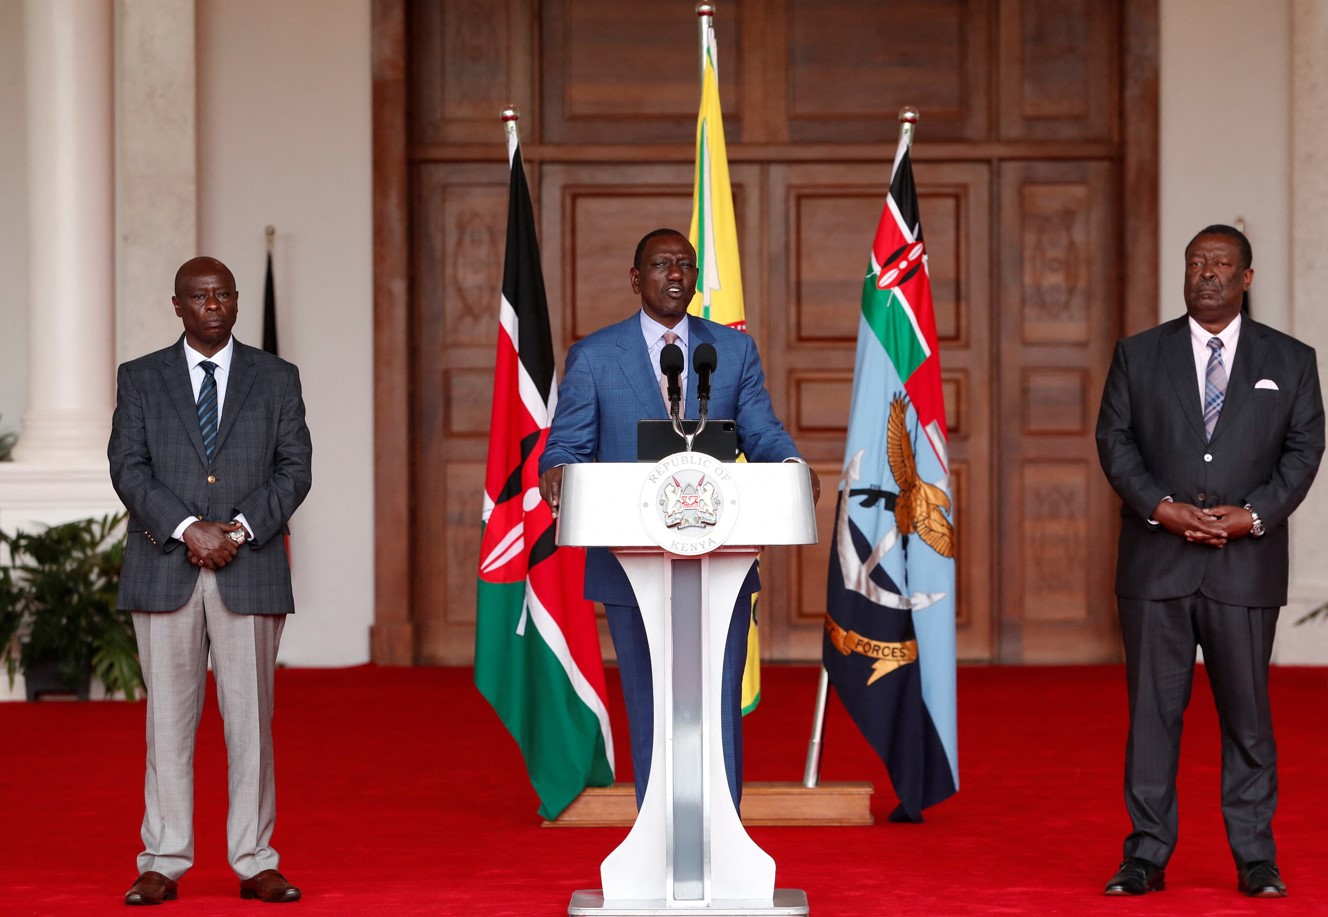 Commission faults Ruto over gender balance in recent cabinet nominations